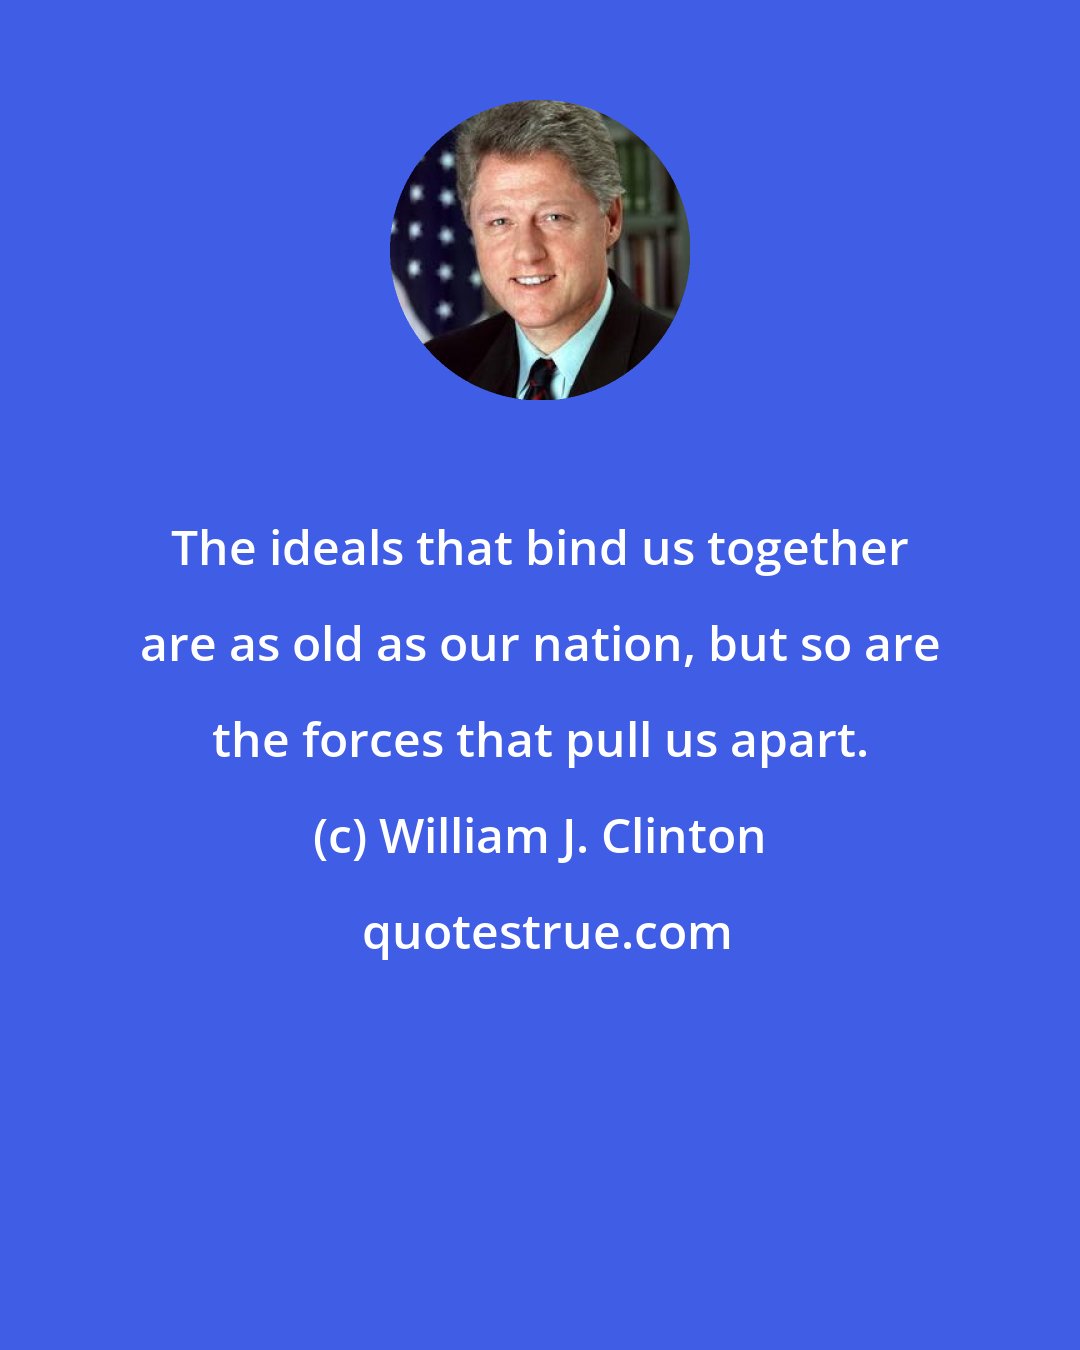 William J. Clinton: The ideals that bind us together are as old as our nation, but so are the forces that pull us apart.